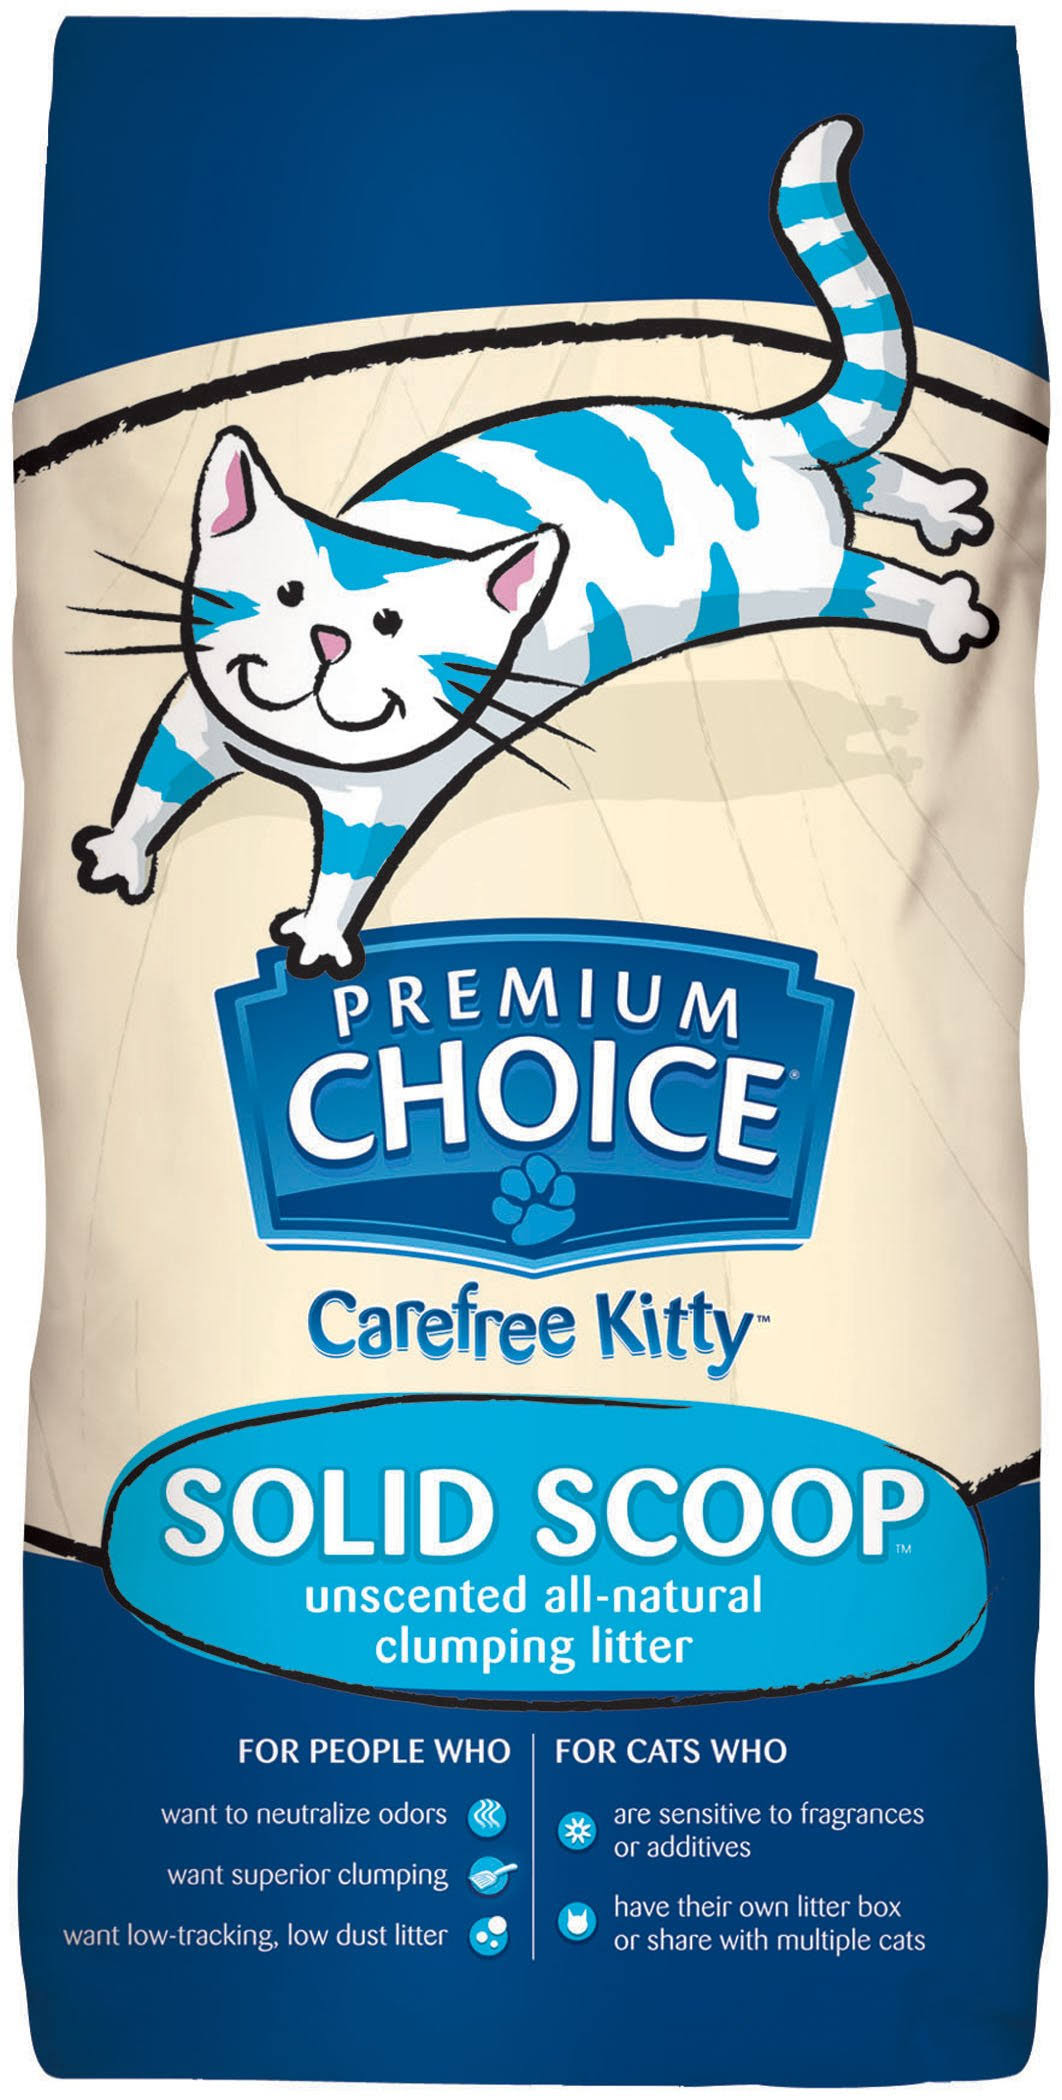 Premium Choice Carefree Kitty Solid Scoop Cat Litter